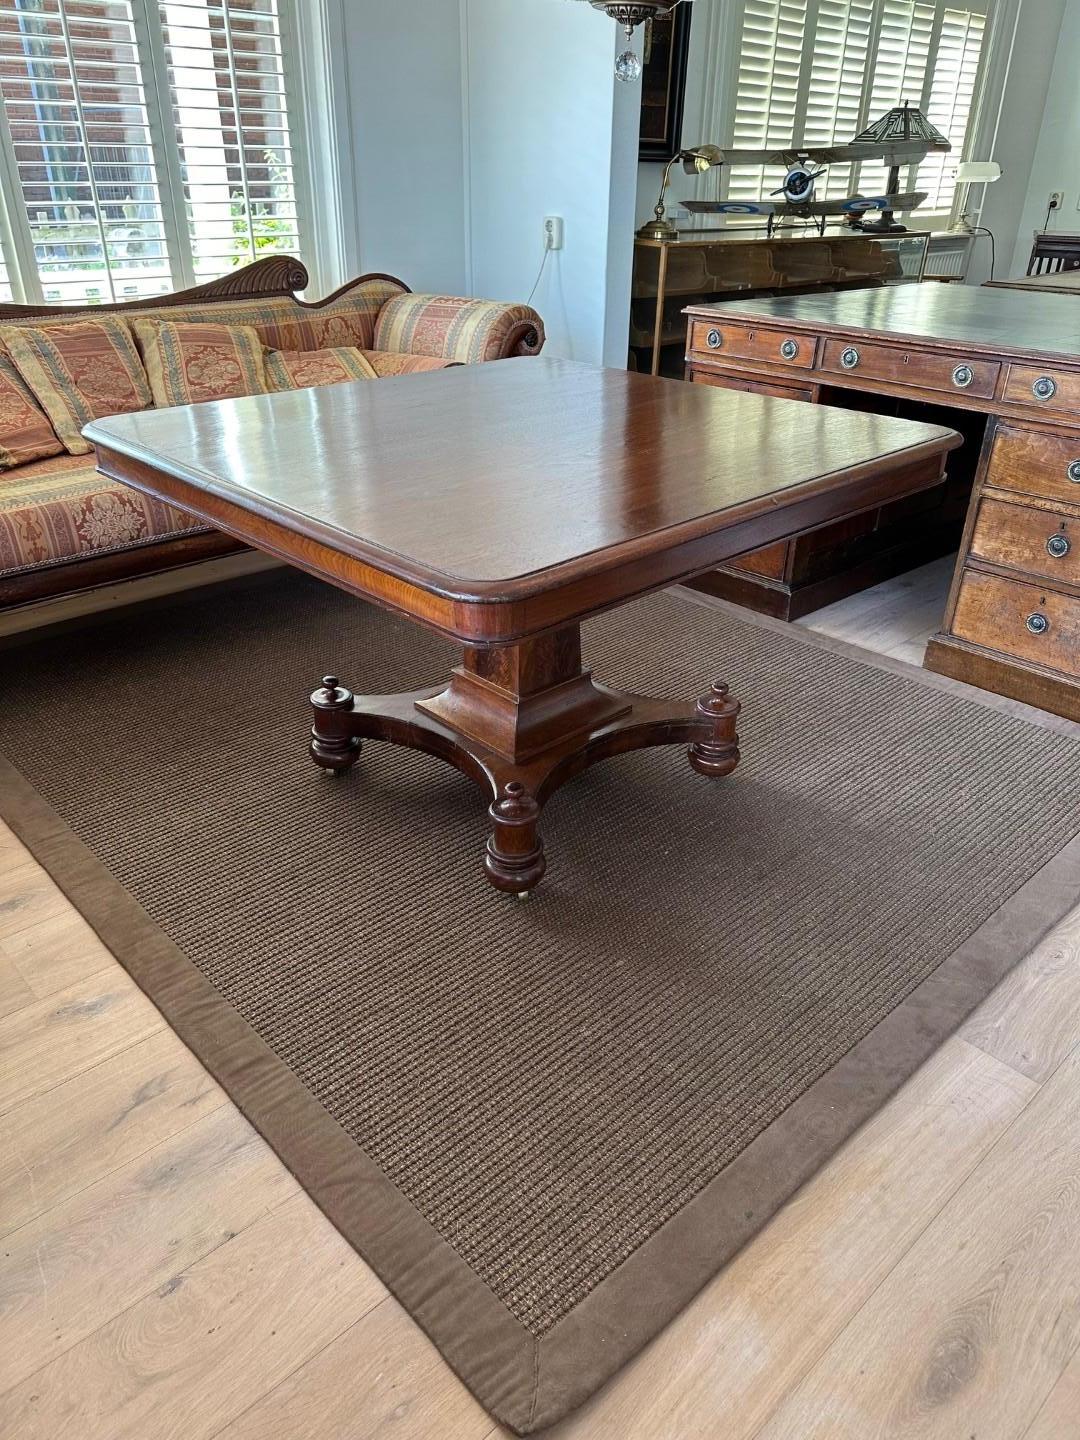 Antique mahogany dining room table on sleek column leg. Beautiful table from the Regency period. Table is in good condition and very stable. Top has signs of wear and leg has old imperfections. The square shape has a distinguished appearance.